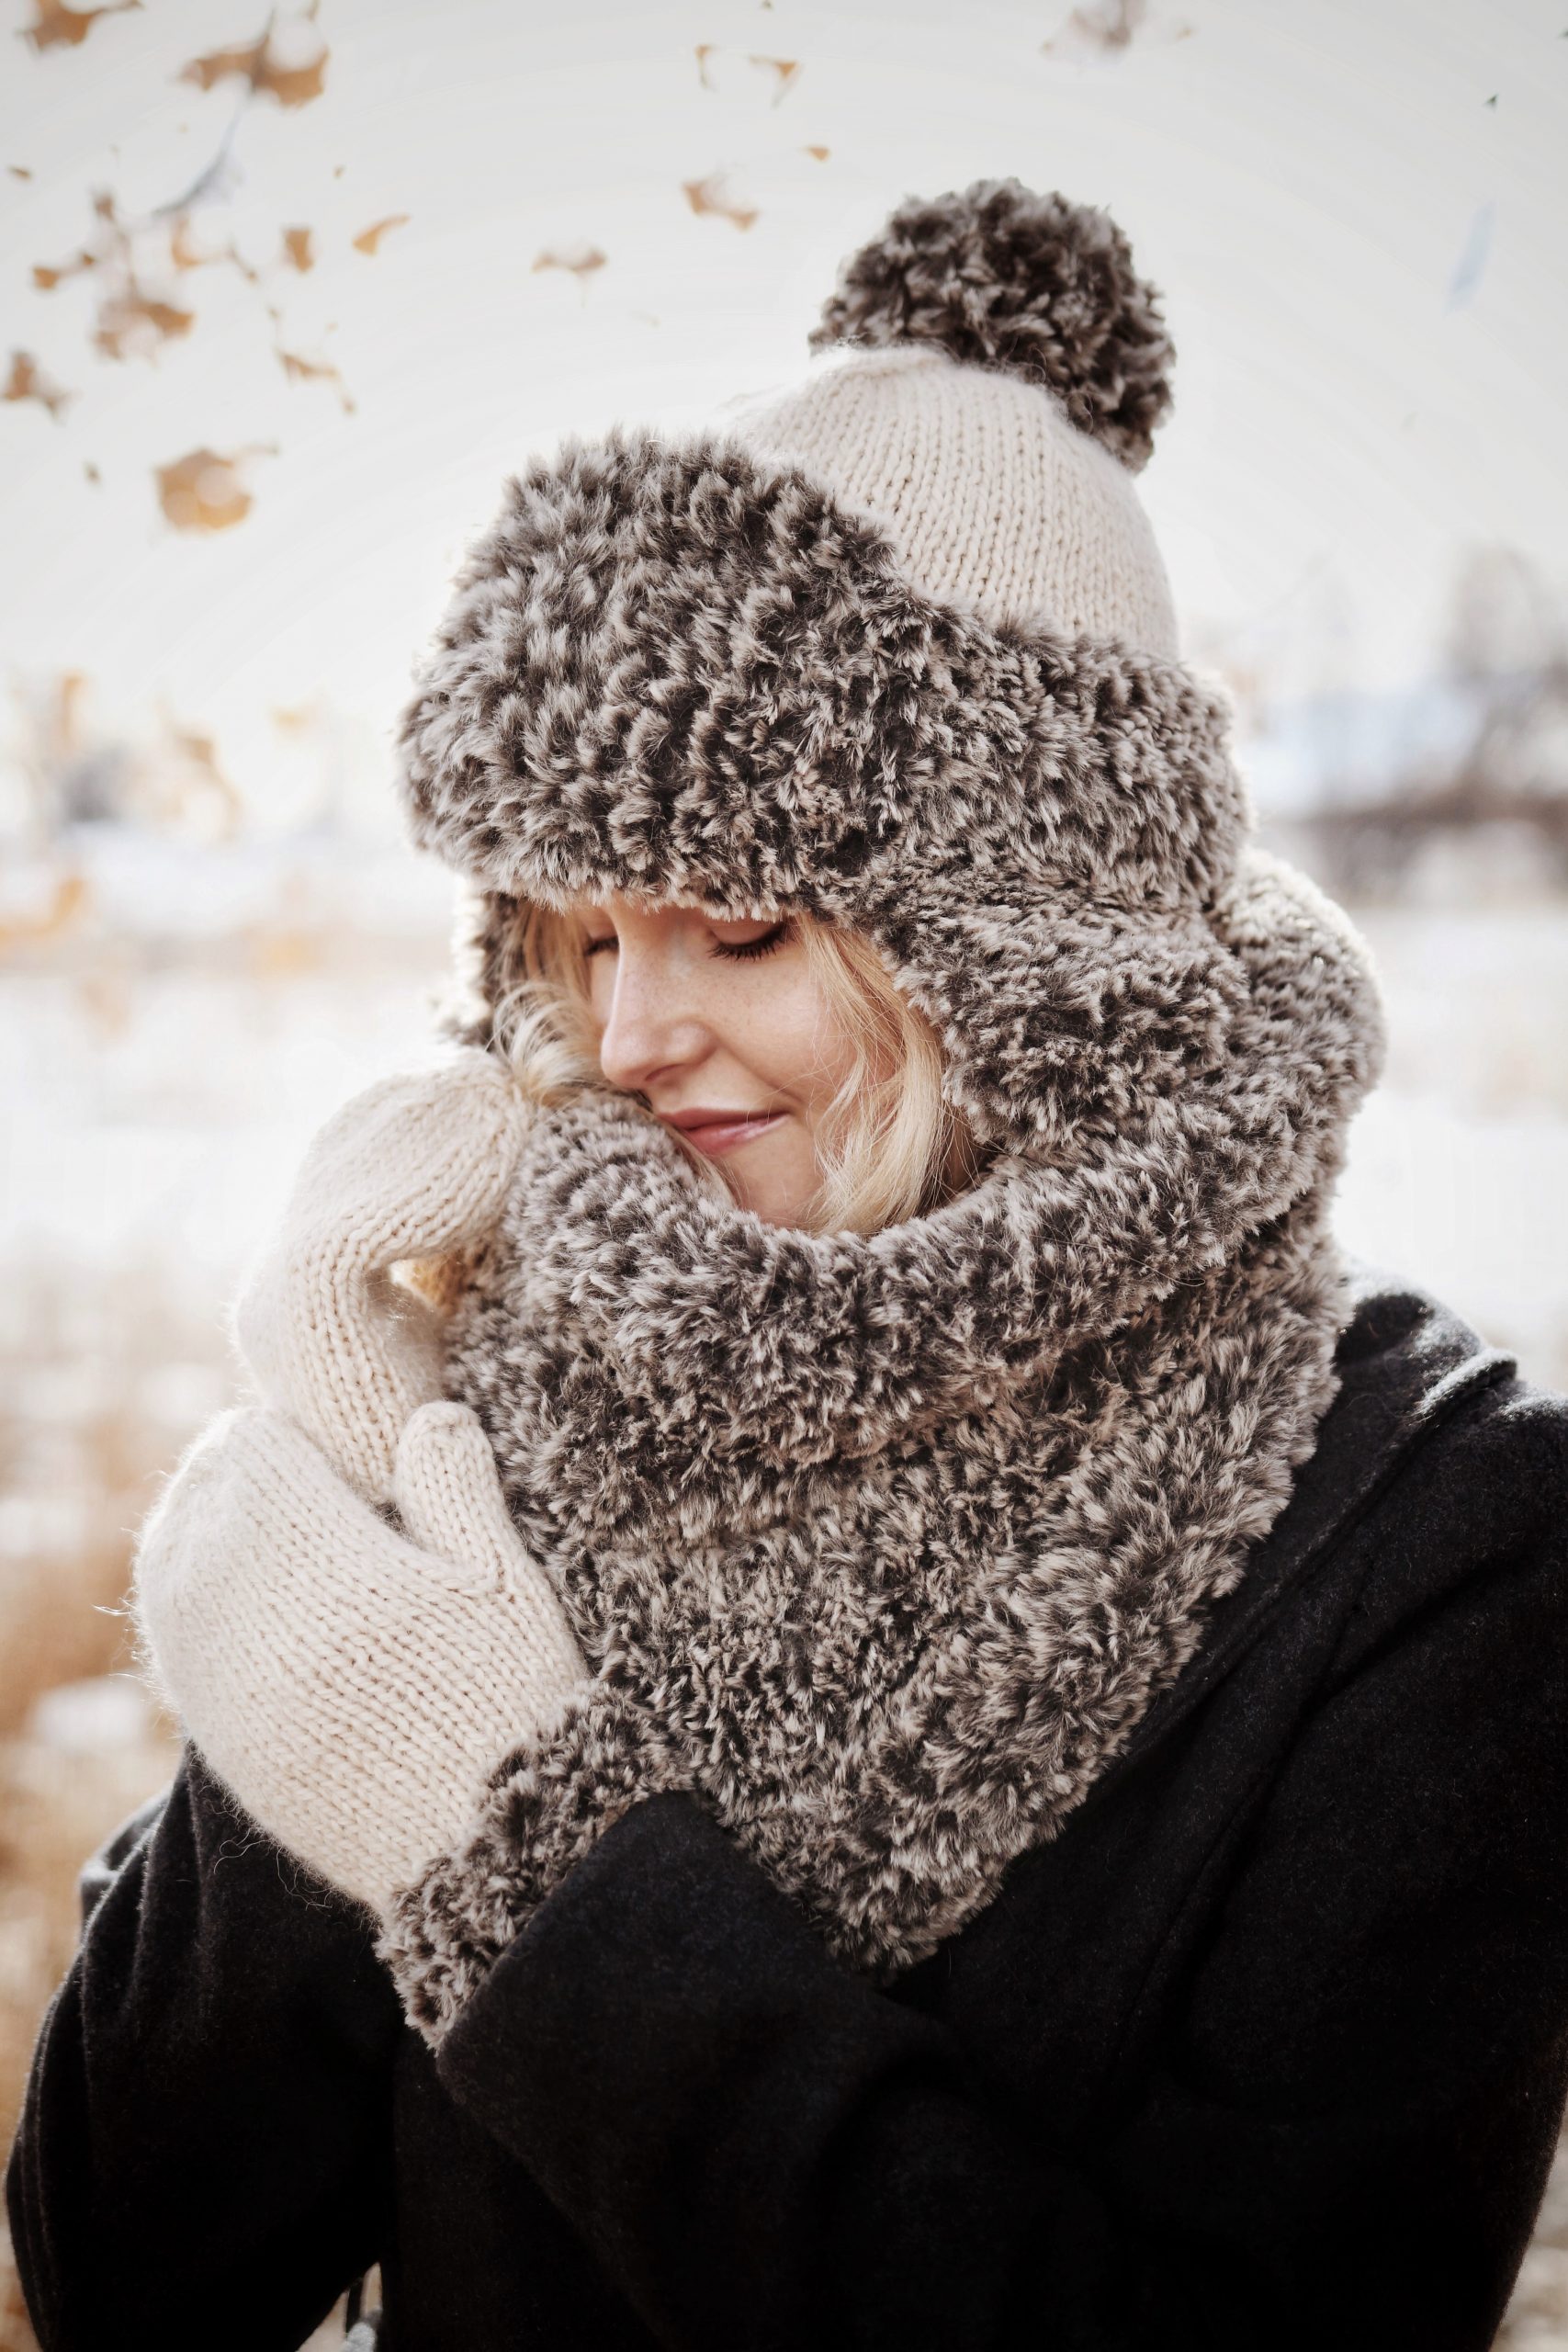 Faux Fur Knit Hat Mittens Cowl Knitting Patterns By Darling